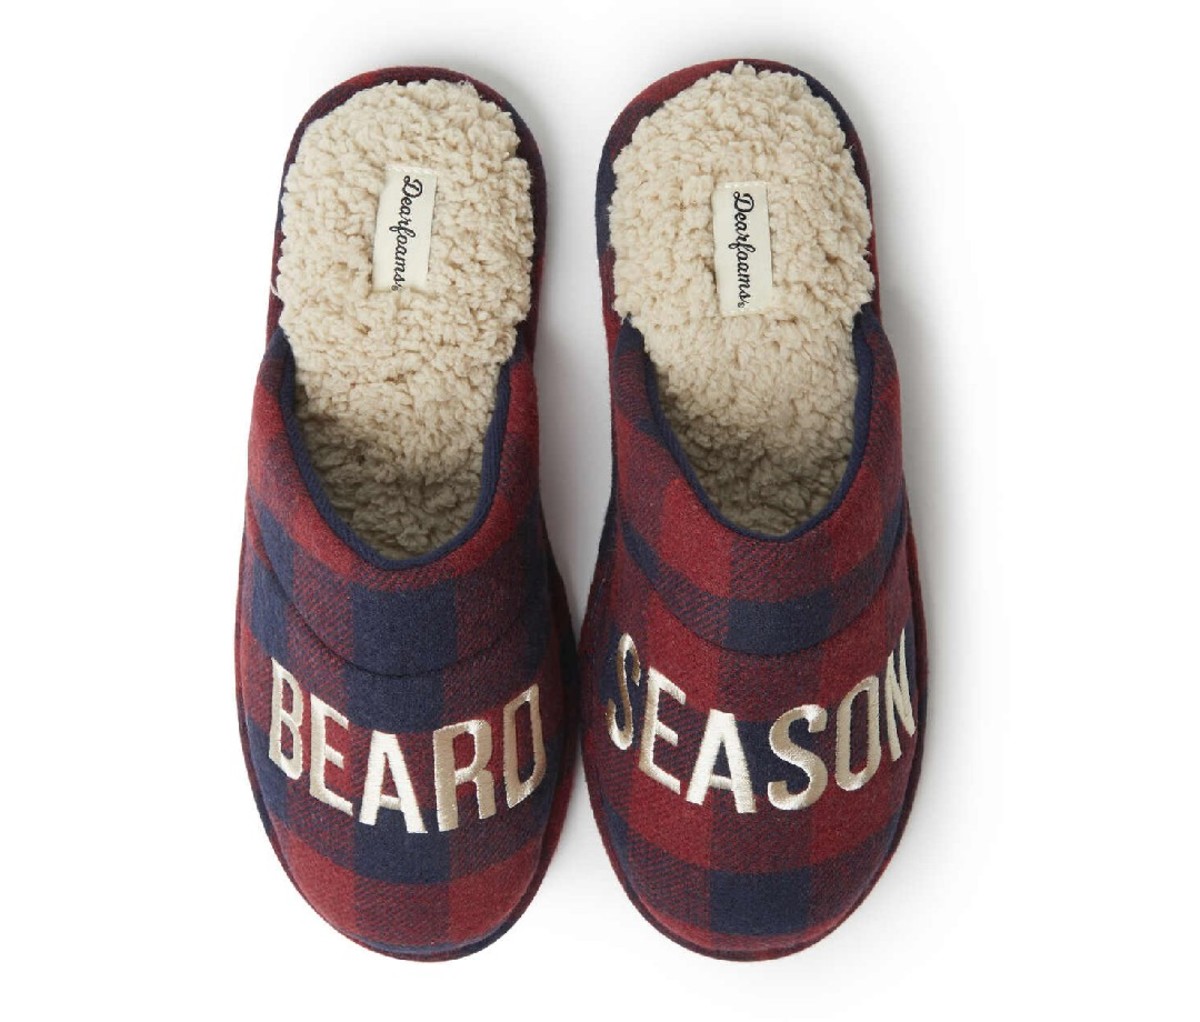 Pair of red plaid Dearfoam Slippers with 